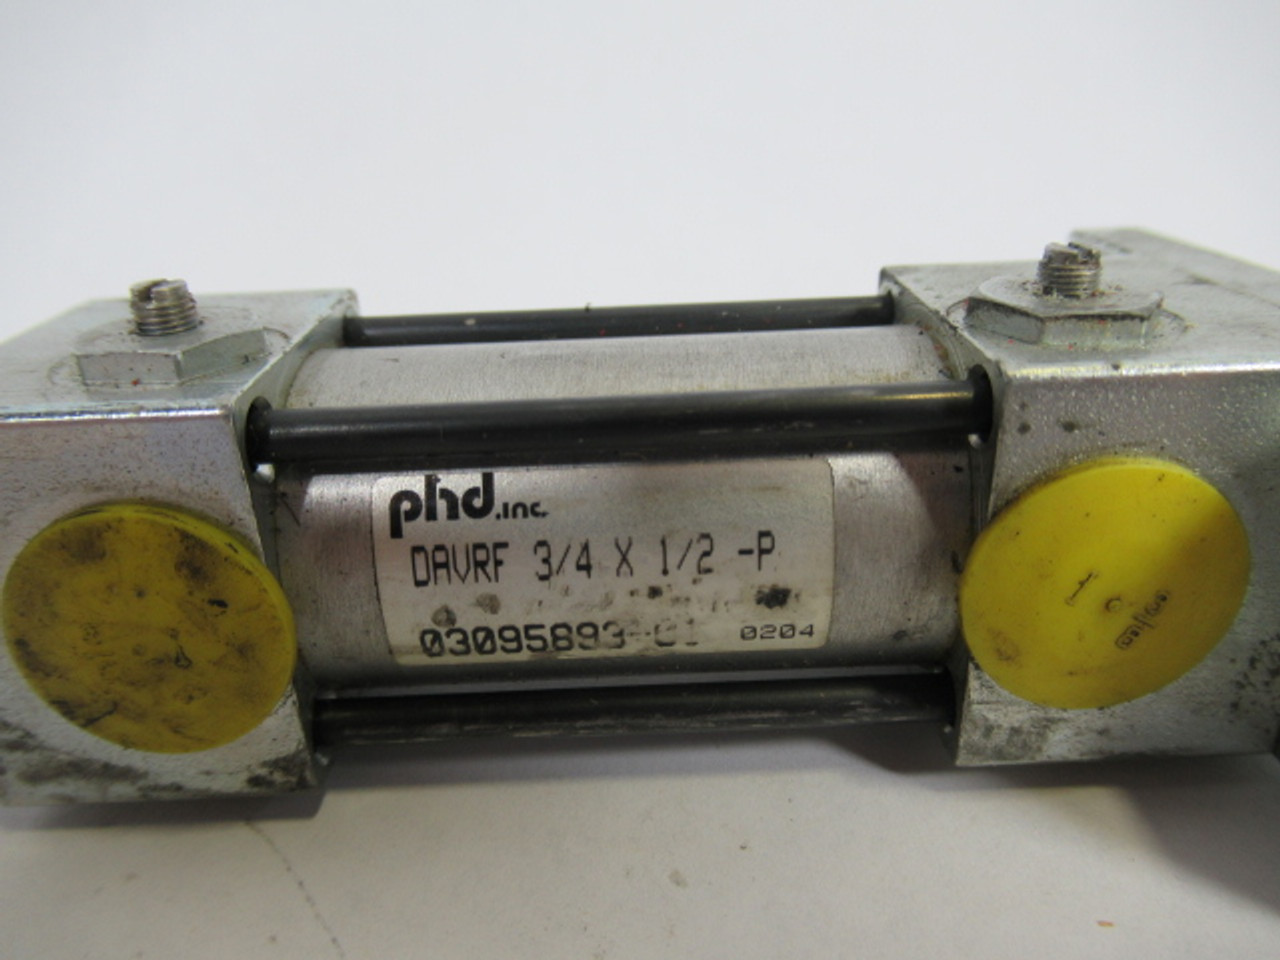 PHD DAVRF-3/4x1/2-P Double Rod Pneumatic Cylinder 3/4" Bore 1/2" Stroke USED